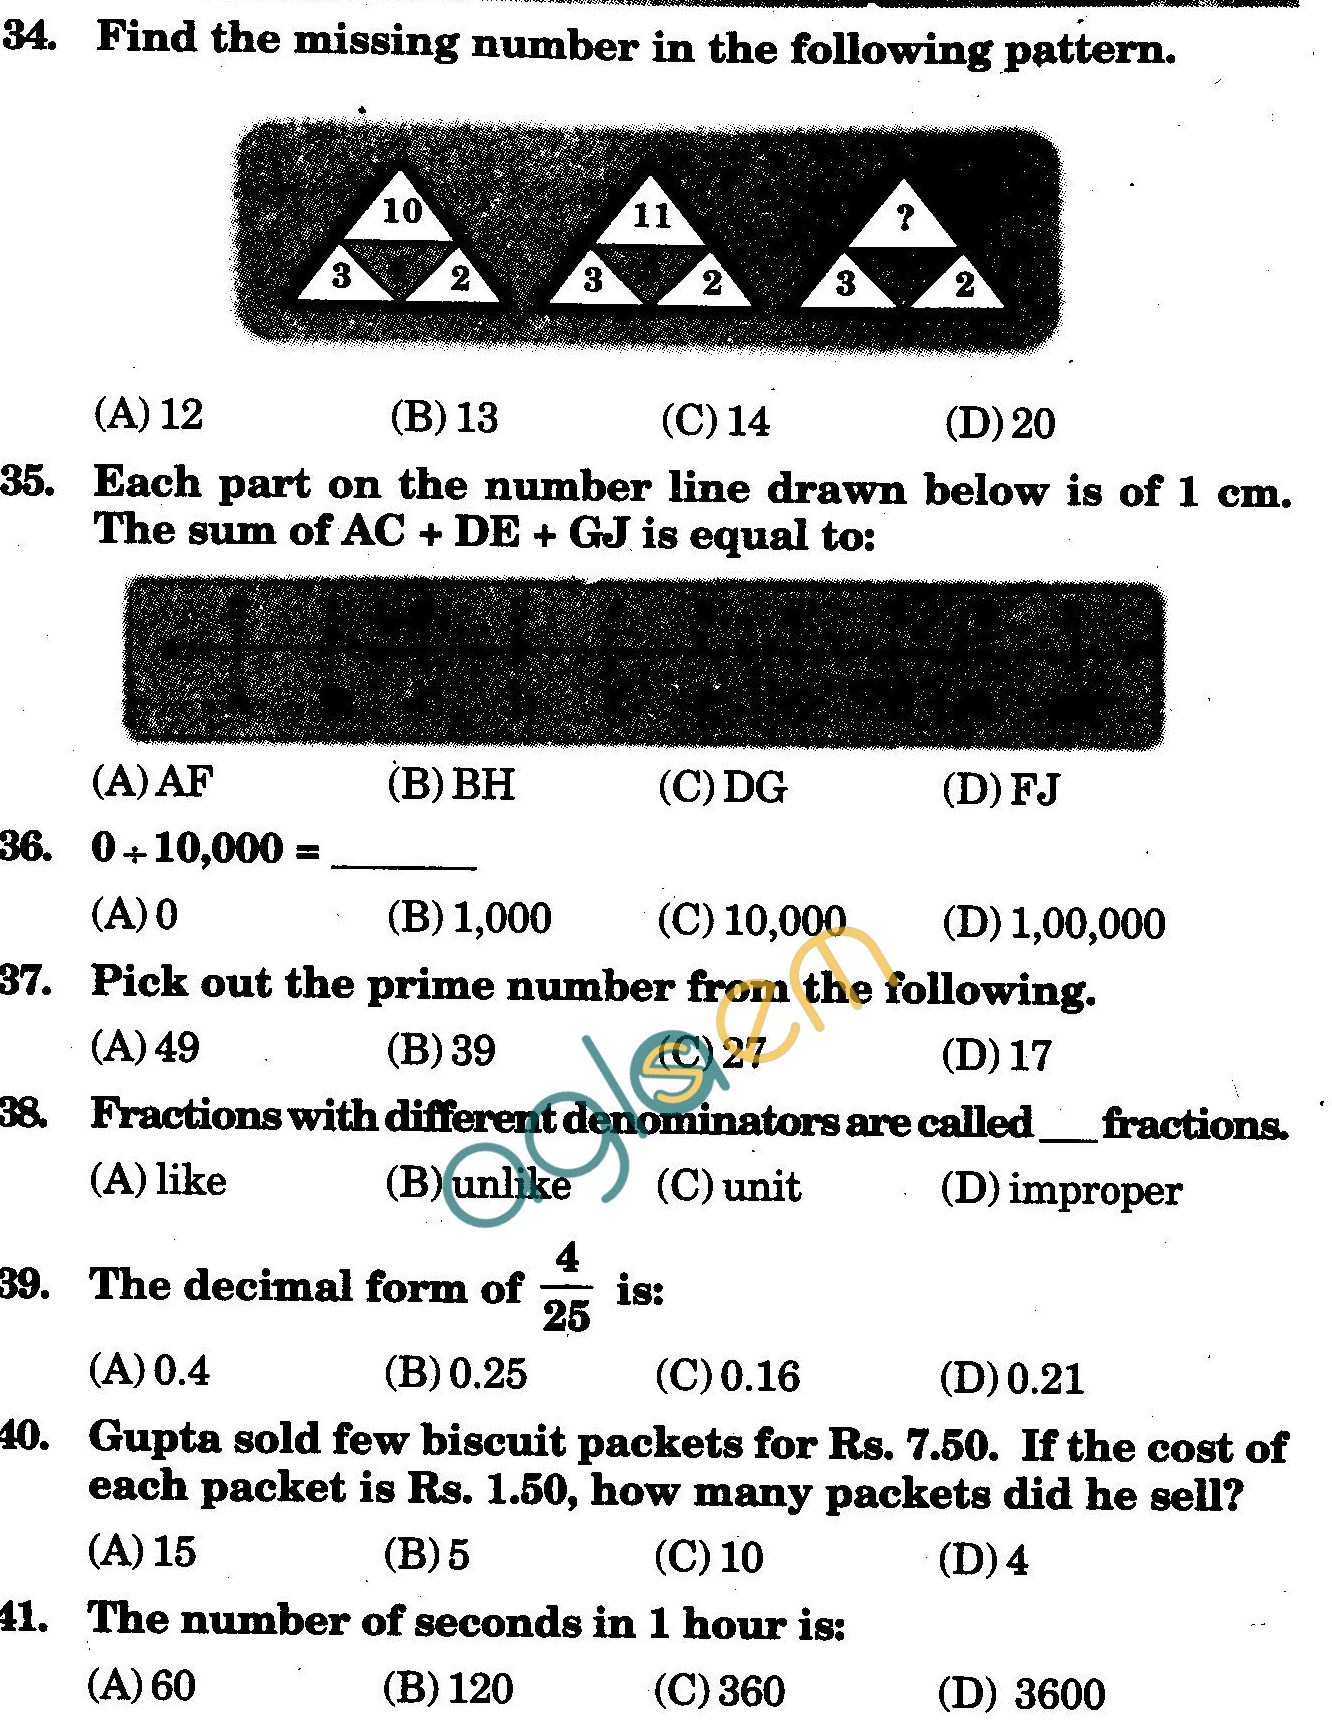 NSTSE 2009 Class IV Question Paper with Answers - Mathematics